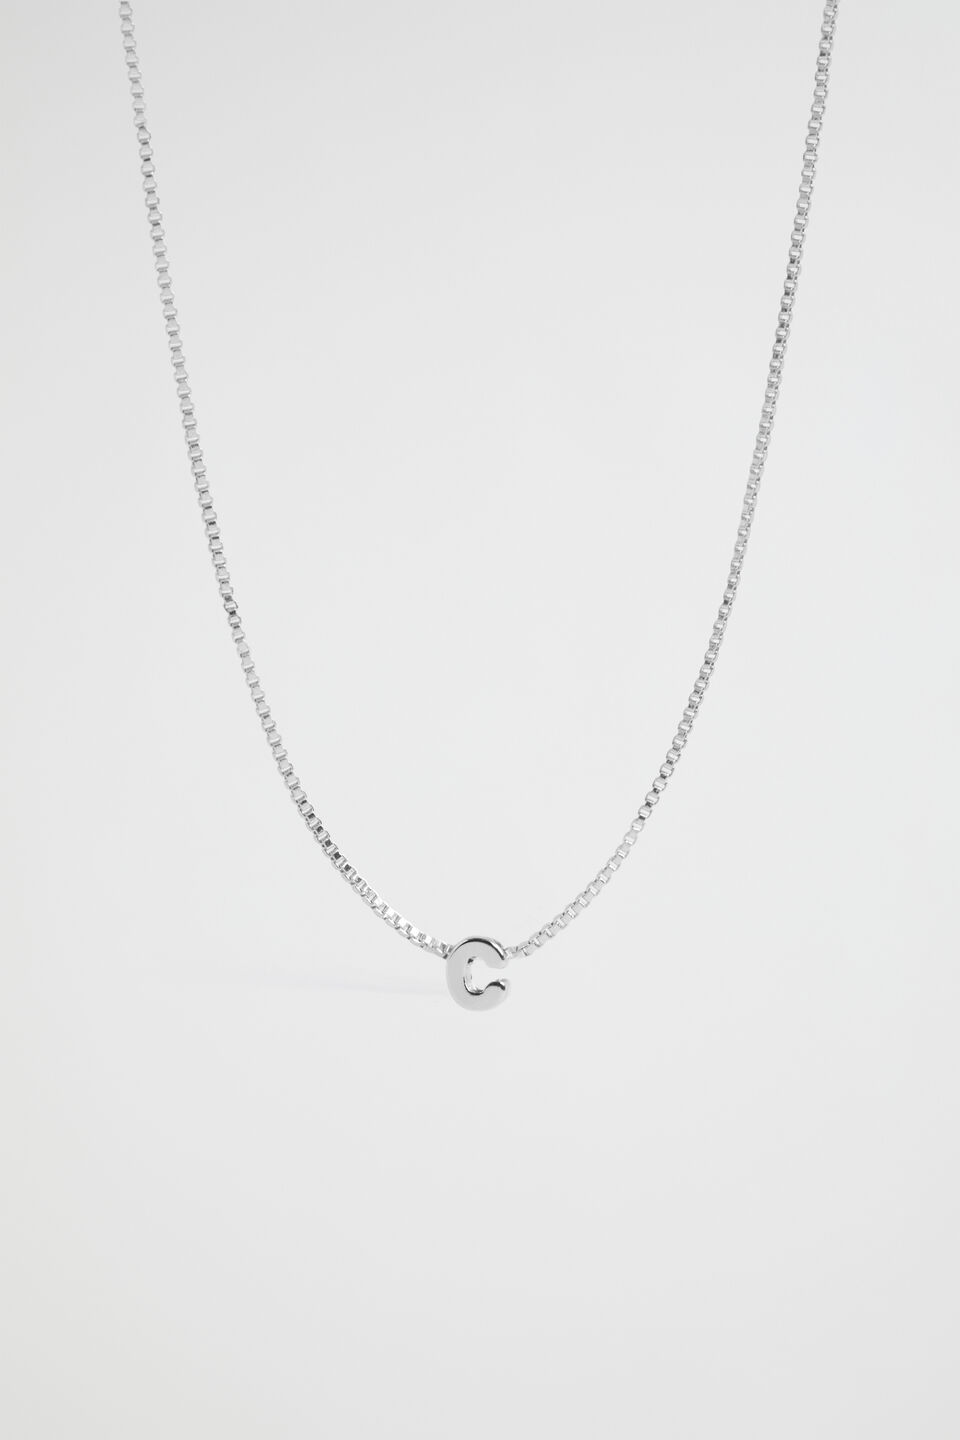 Silver Initial Necklace  C